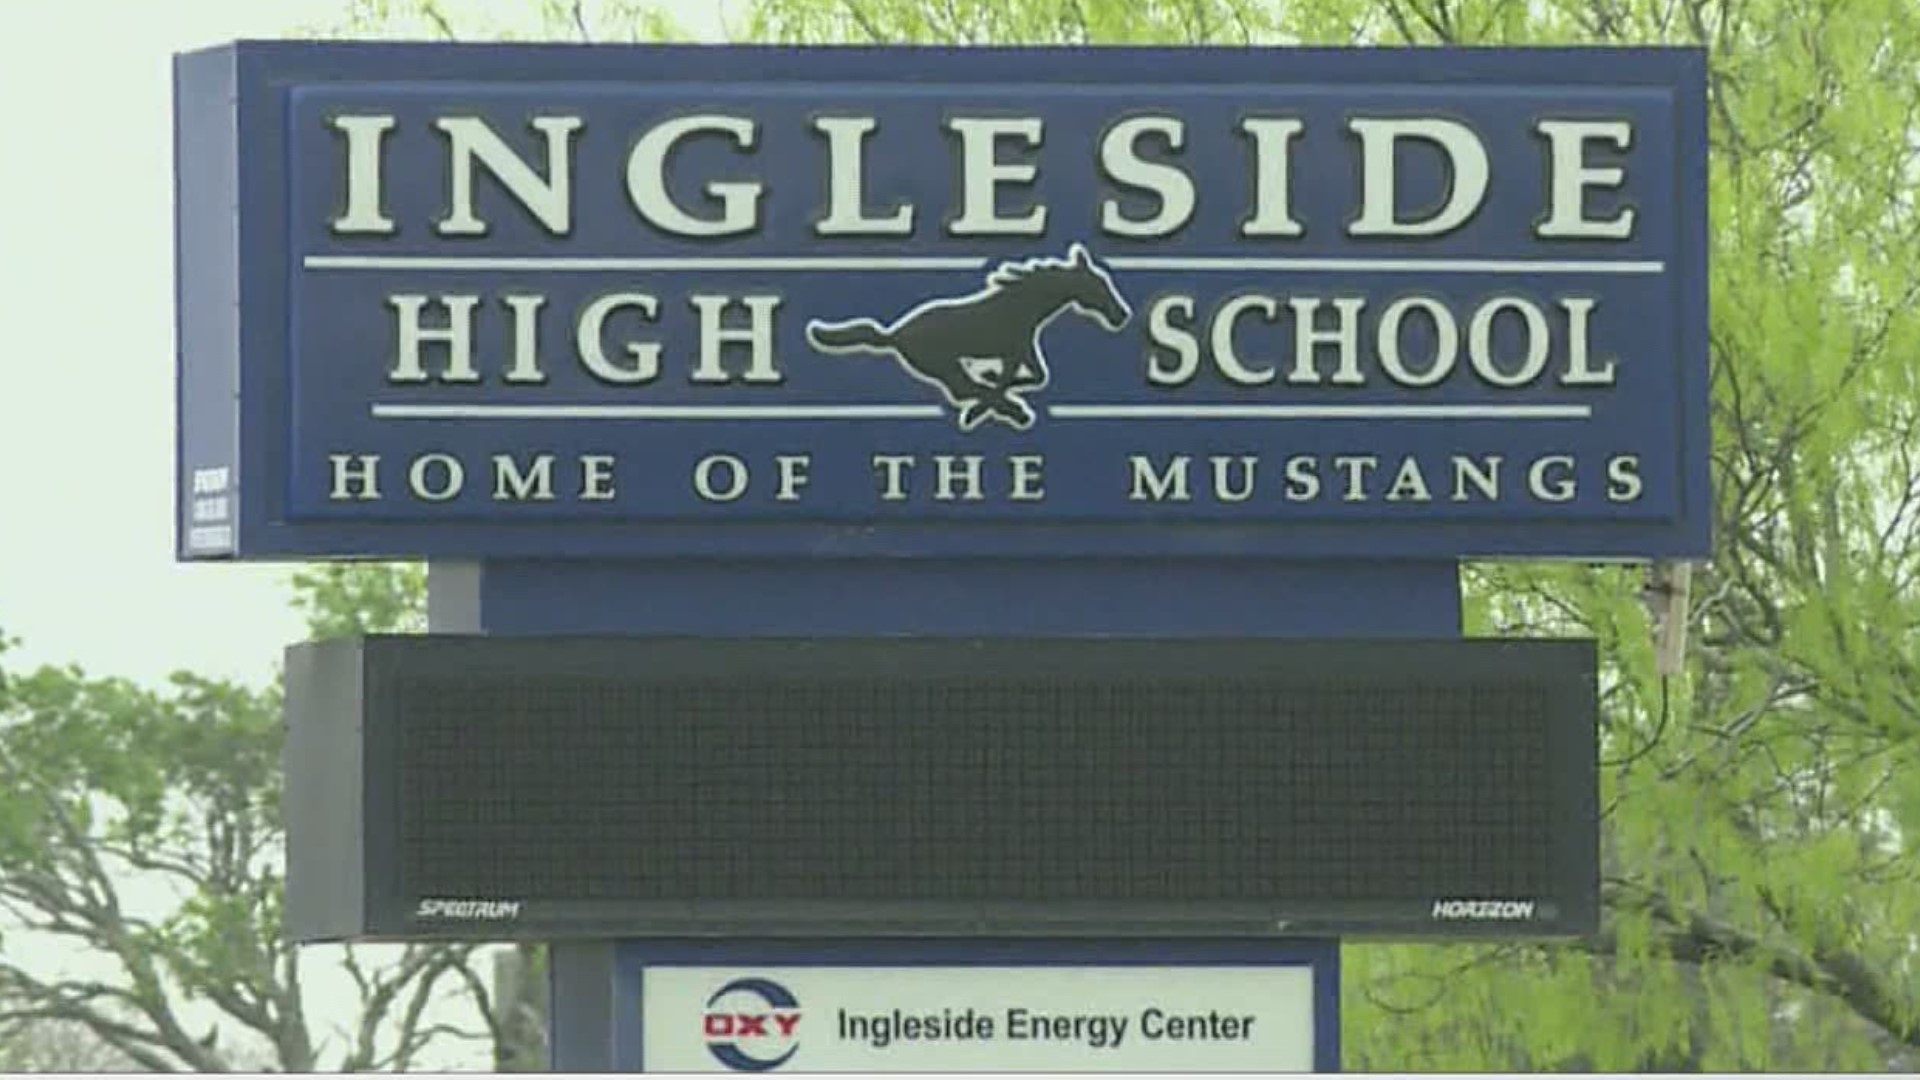 On May 1, voters gave the green light for proposition A, the issuance of $28,800,000 for bonds for the Ingleside ISD school facilities.